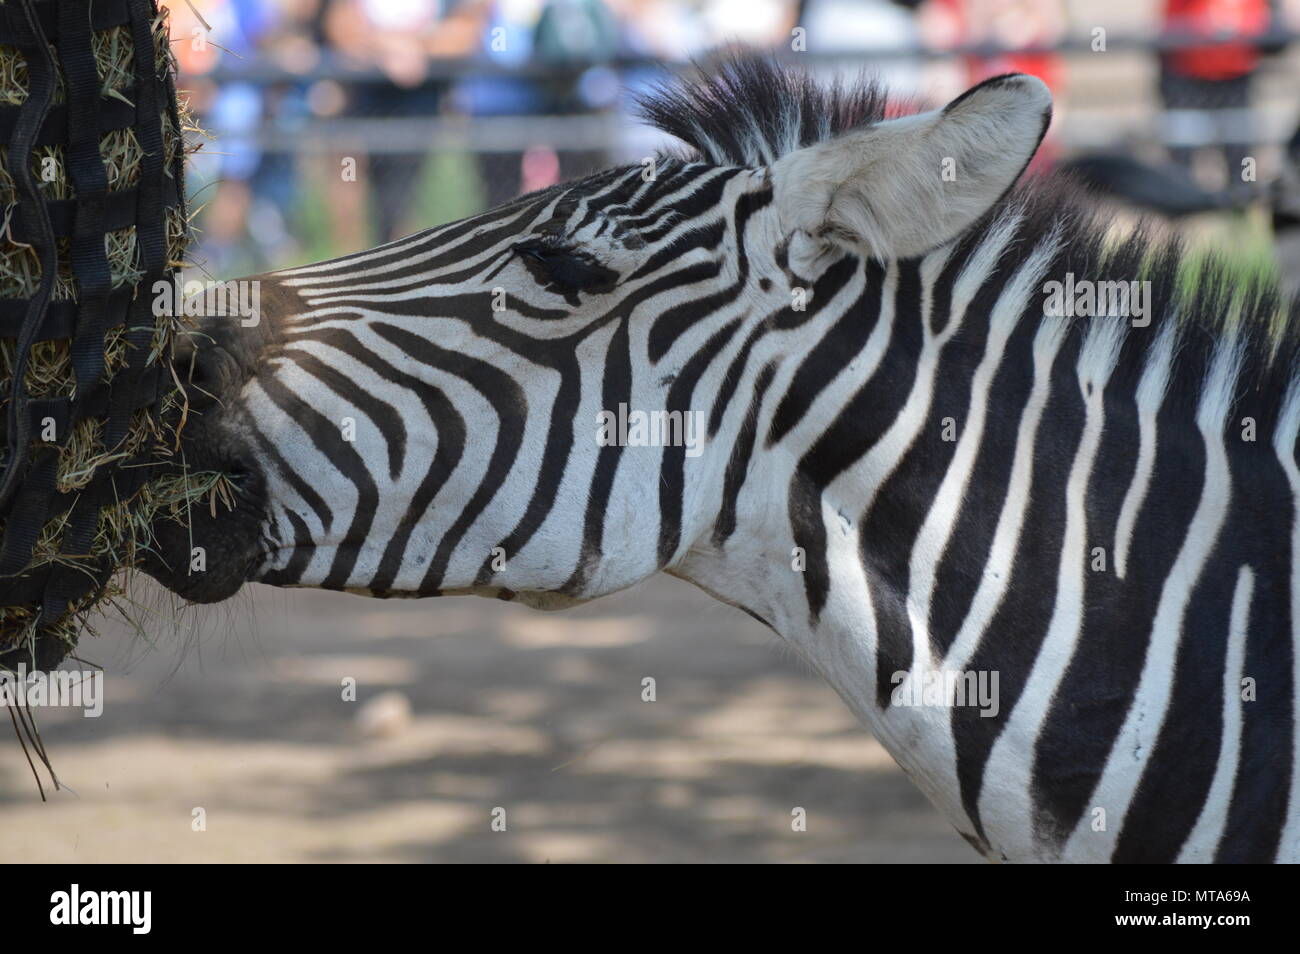 Zebra eating out of a feed bag Stock Photo